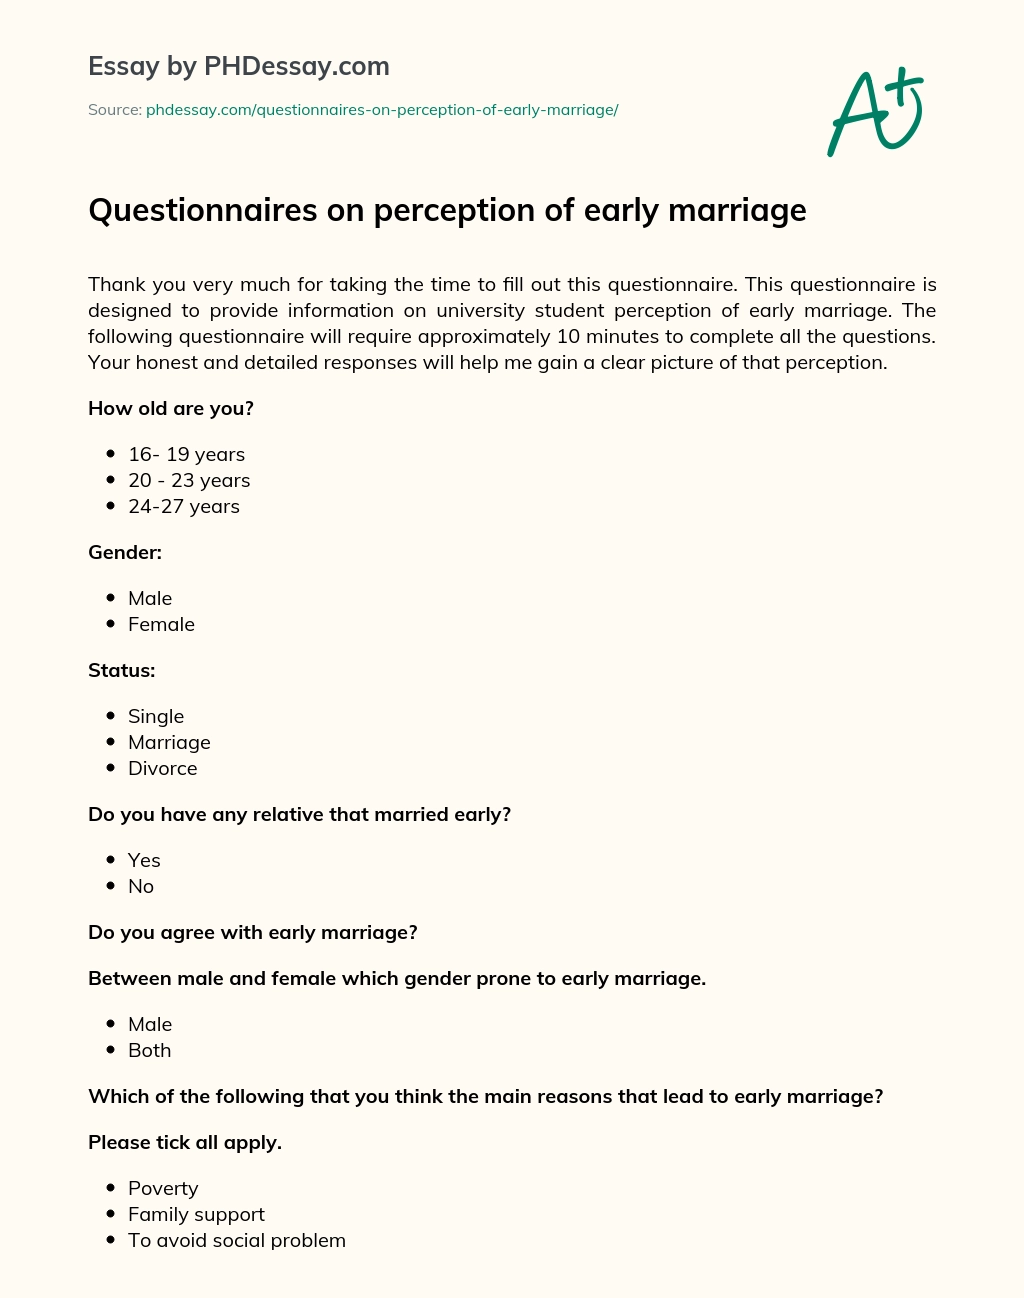 Questionnaires on perception of early marriage essay